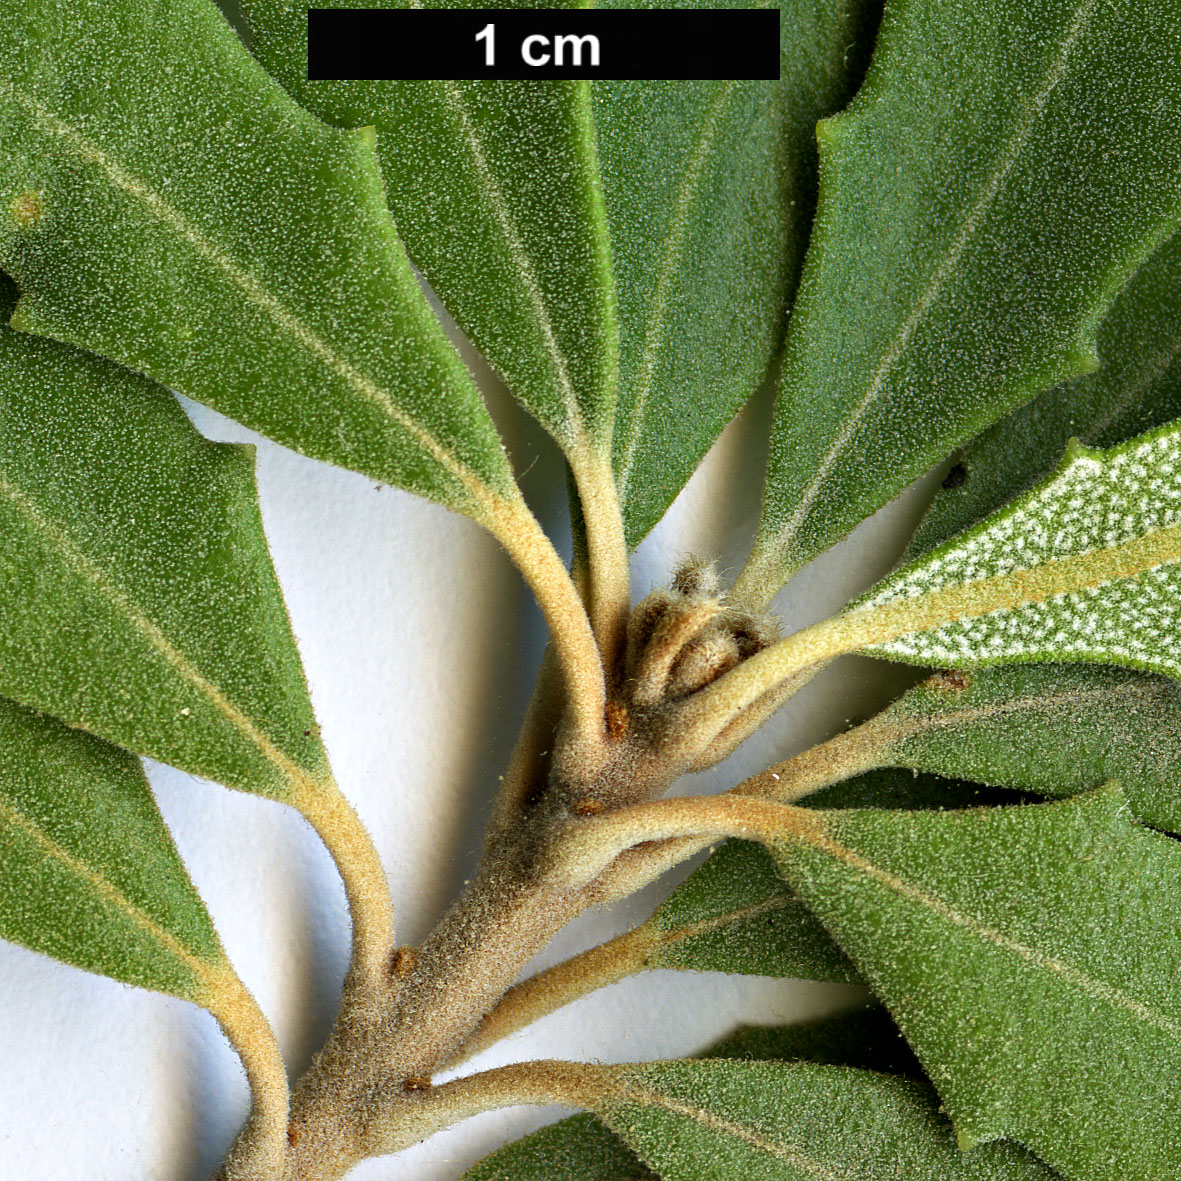 High resolution image: Family: Proteaceae - Genus: Banksia - Taxon: epica